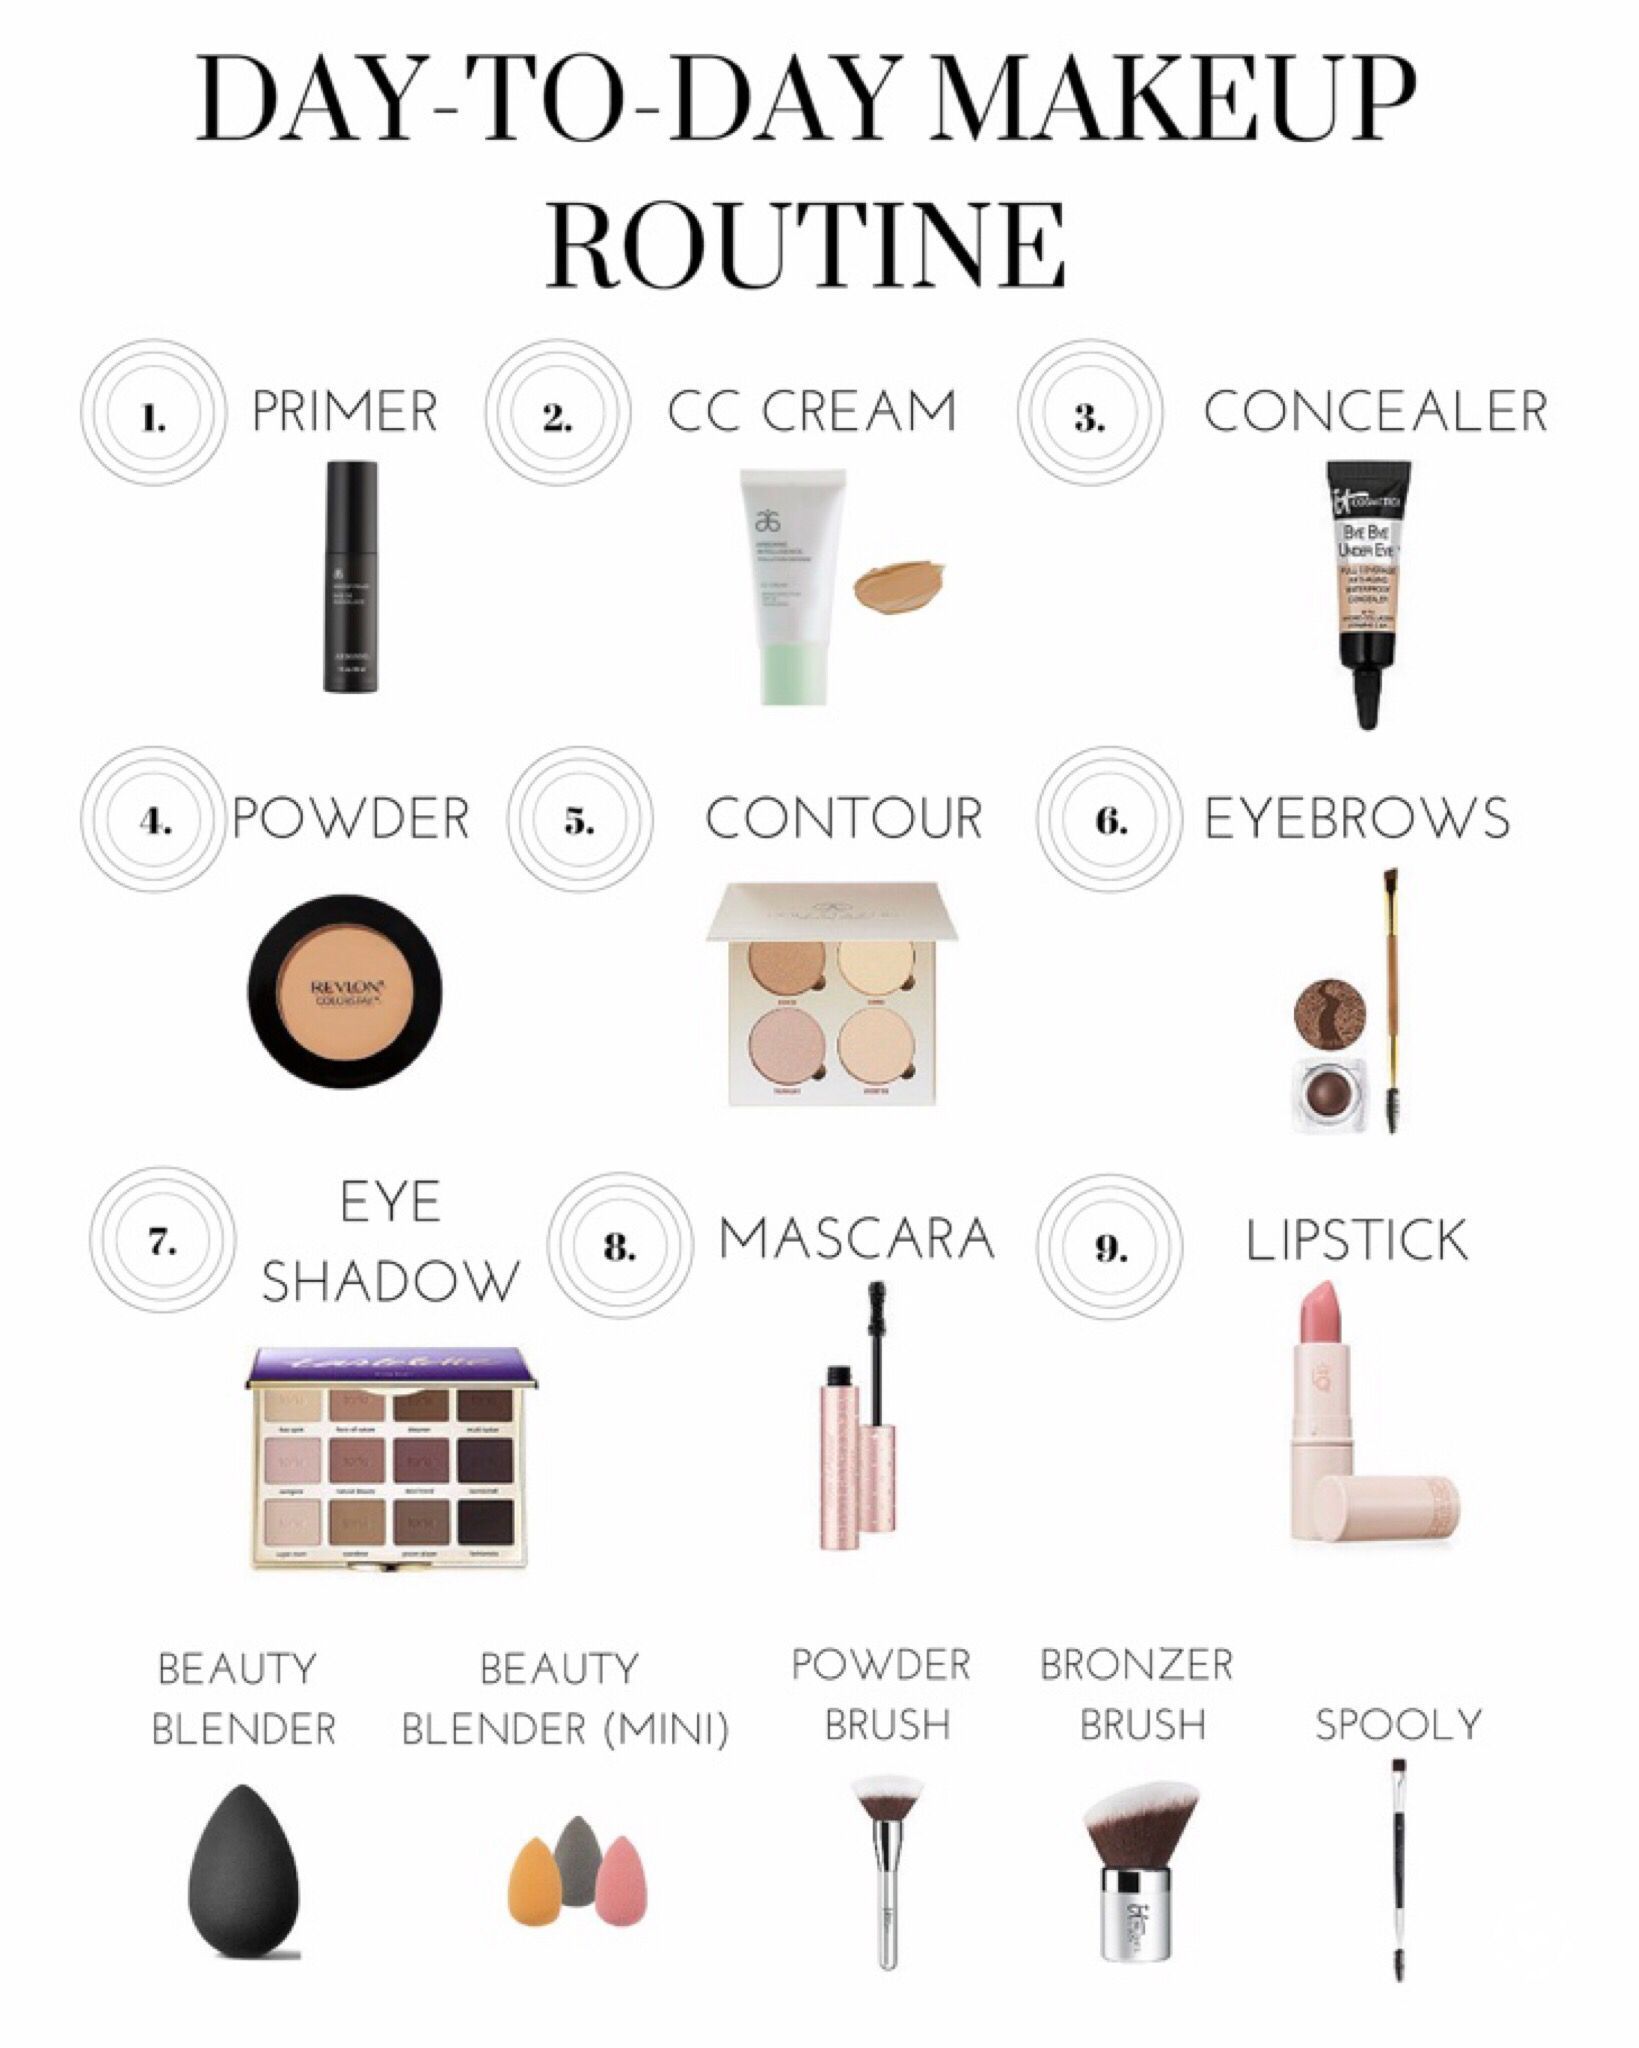 Day-To-Day Makeup Routine - - Day-To-Day Makeup Routine - -   9 beauty Day routine ideas